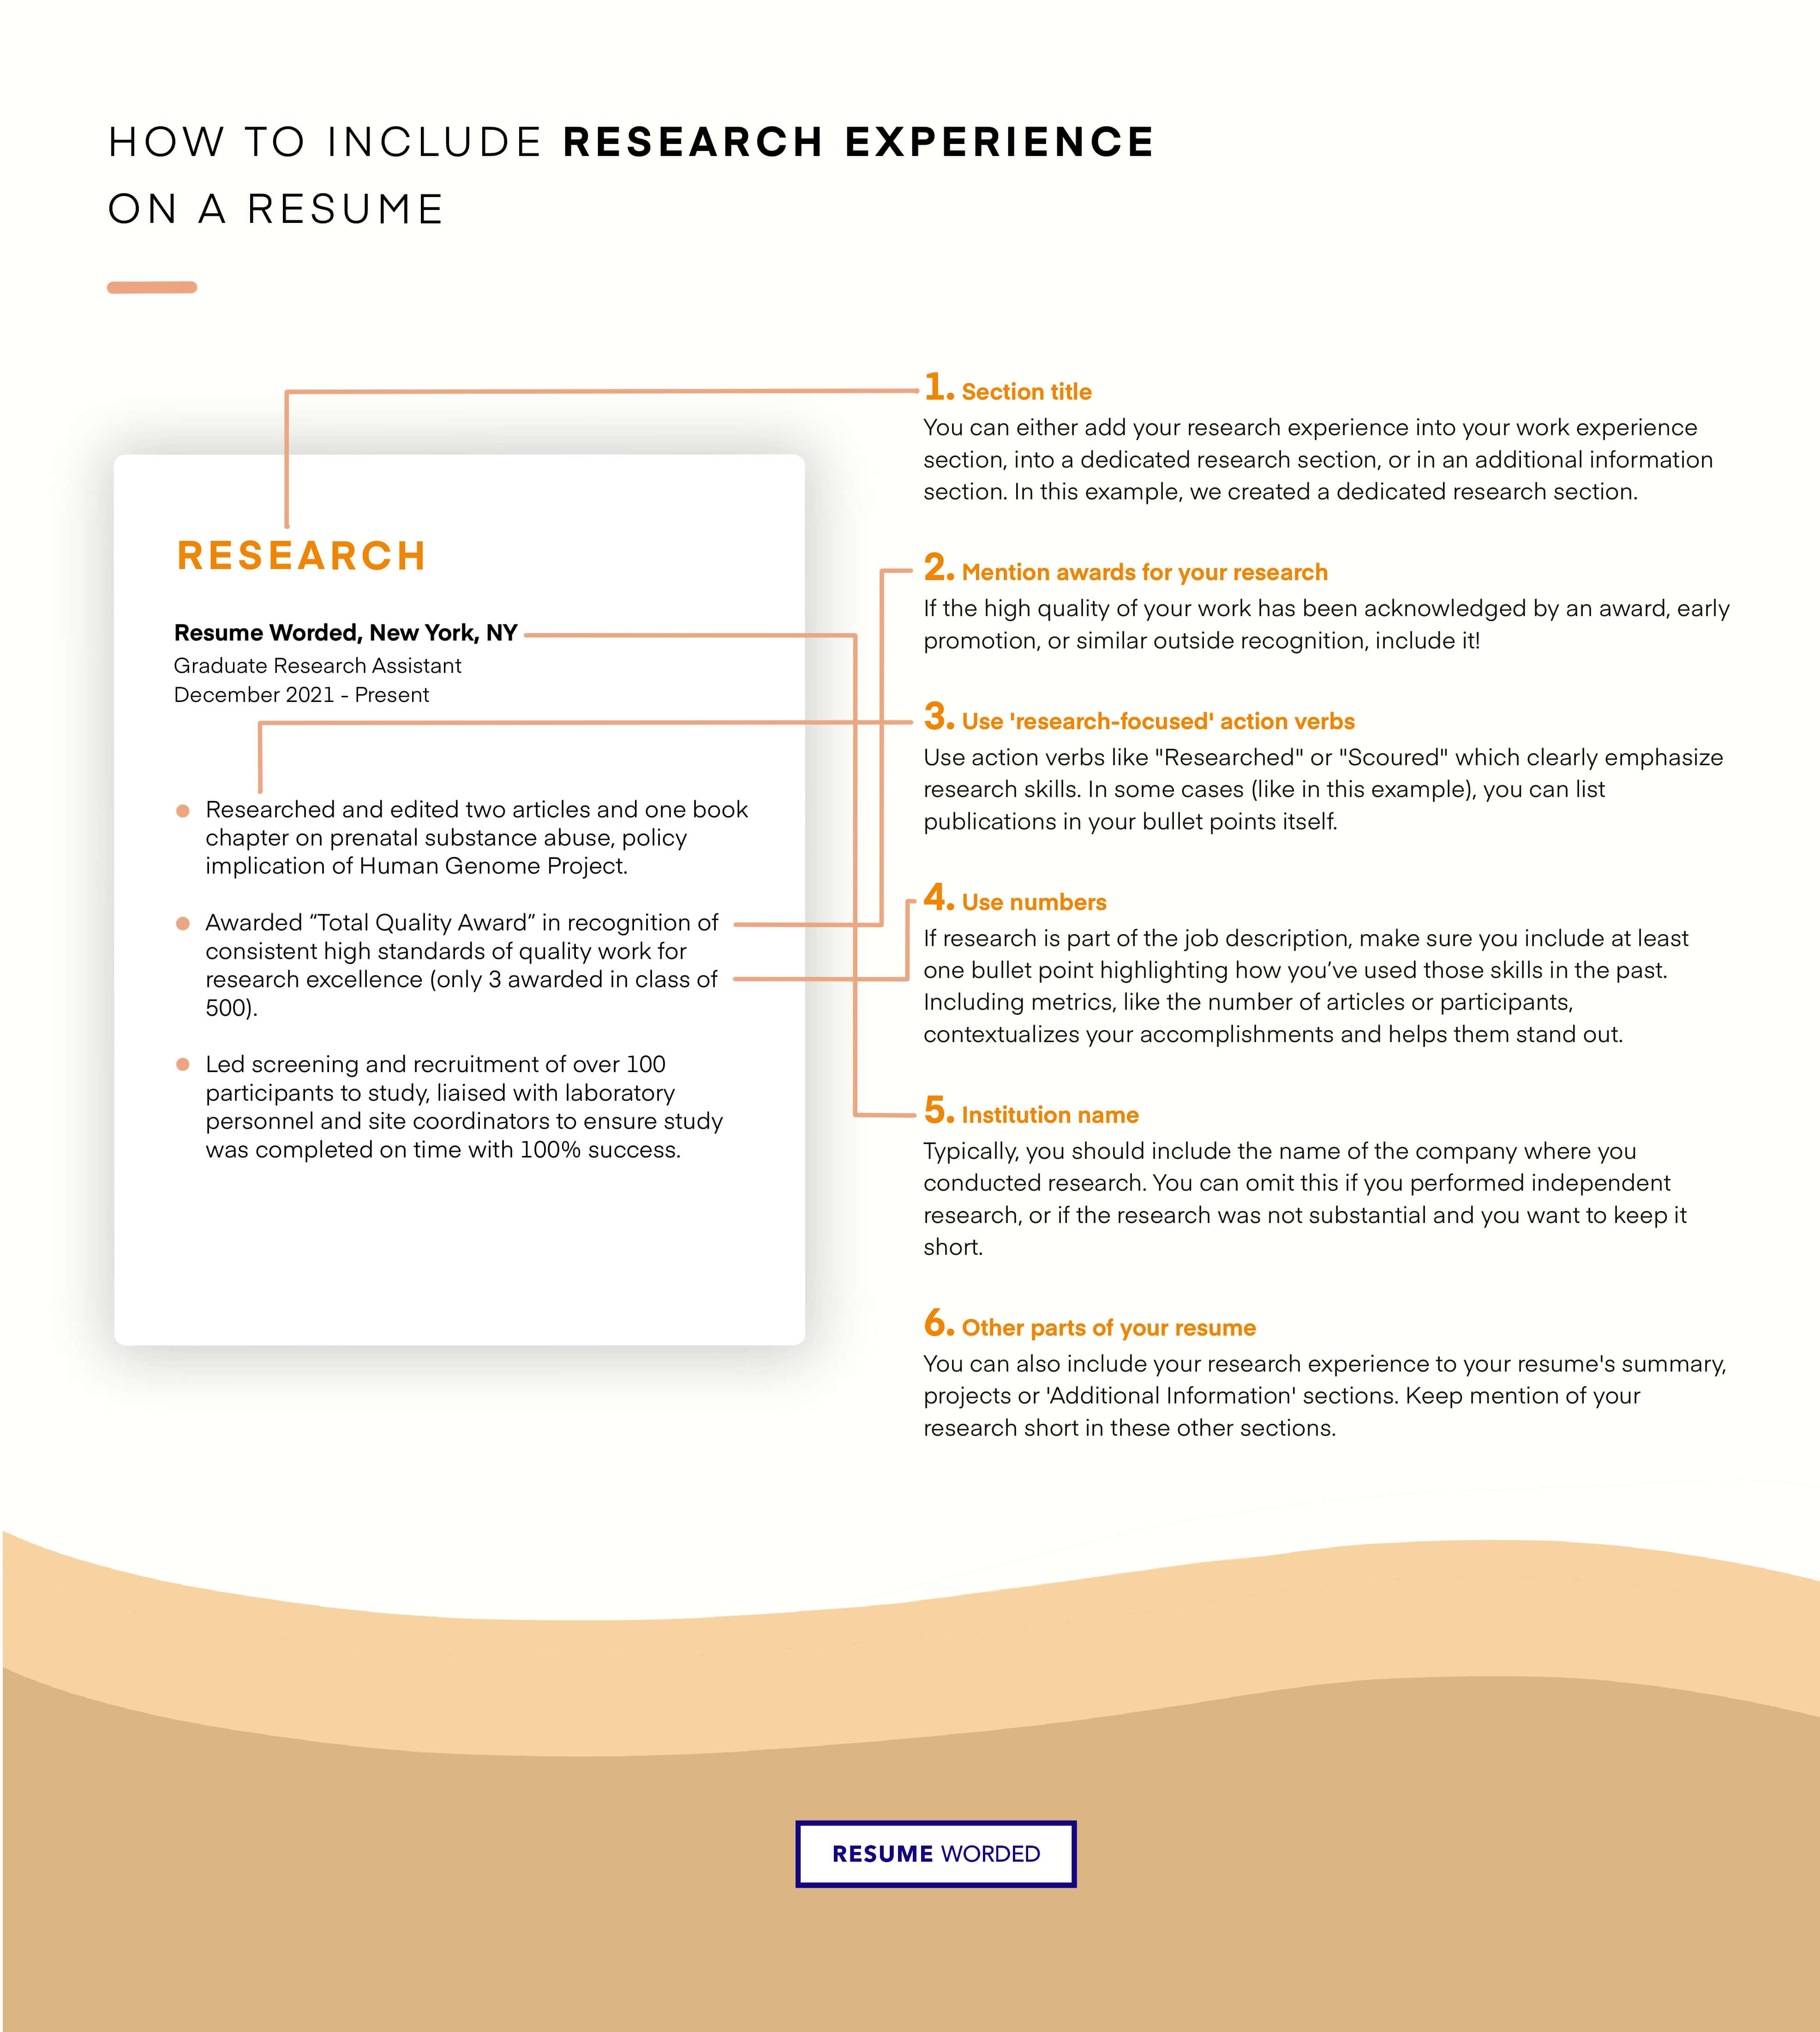 Includes a resume summary focused on graduate research interests and experience - Graduate Research Assistant Resume